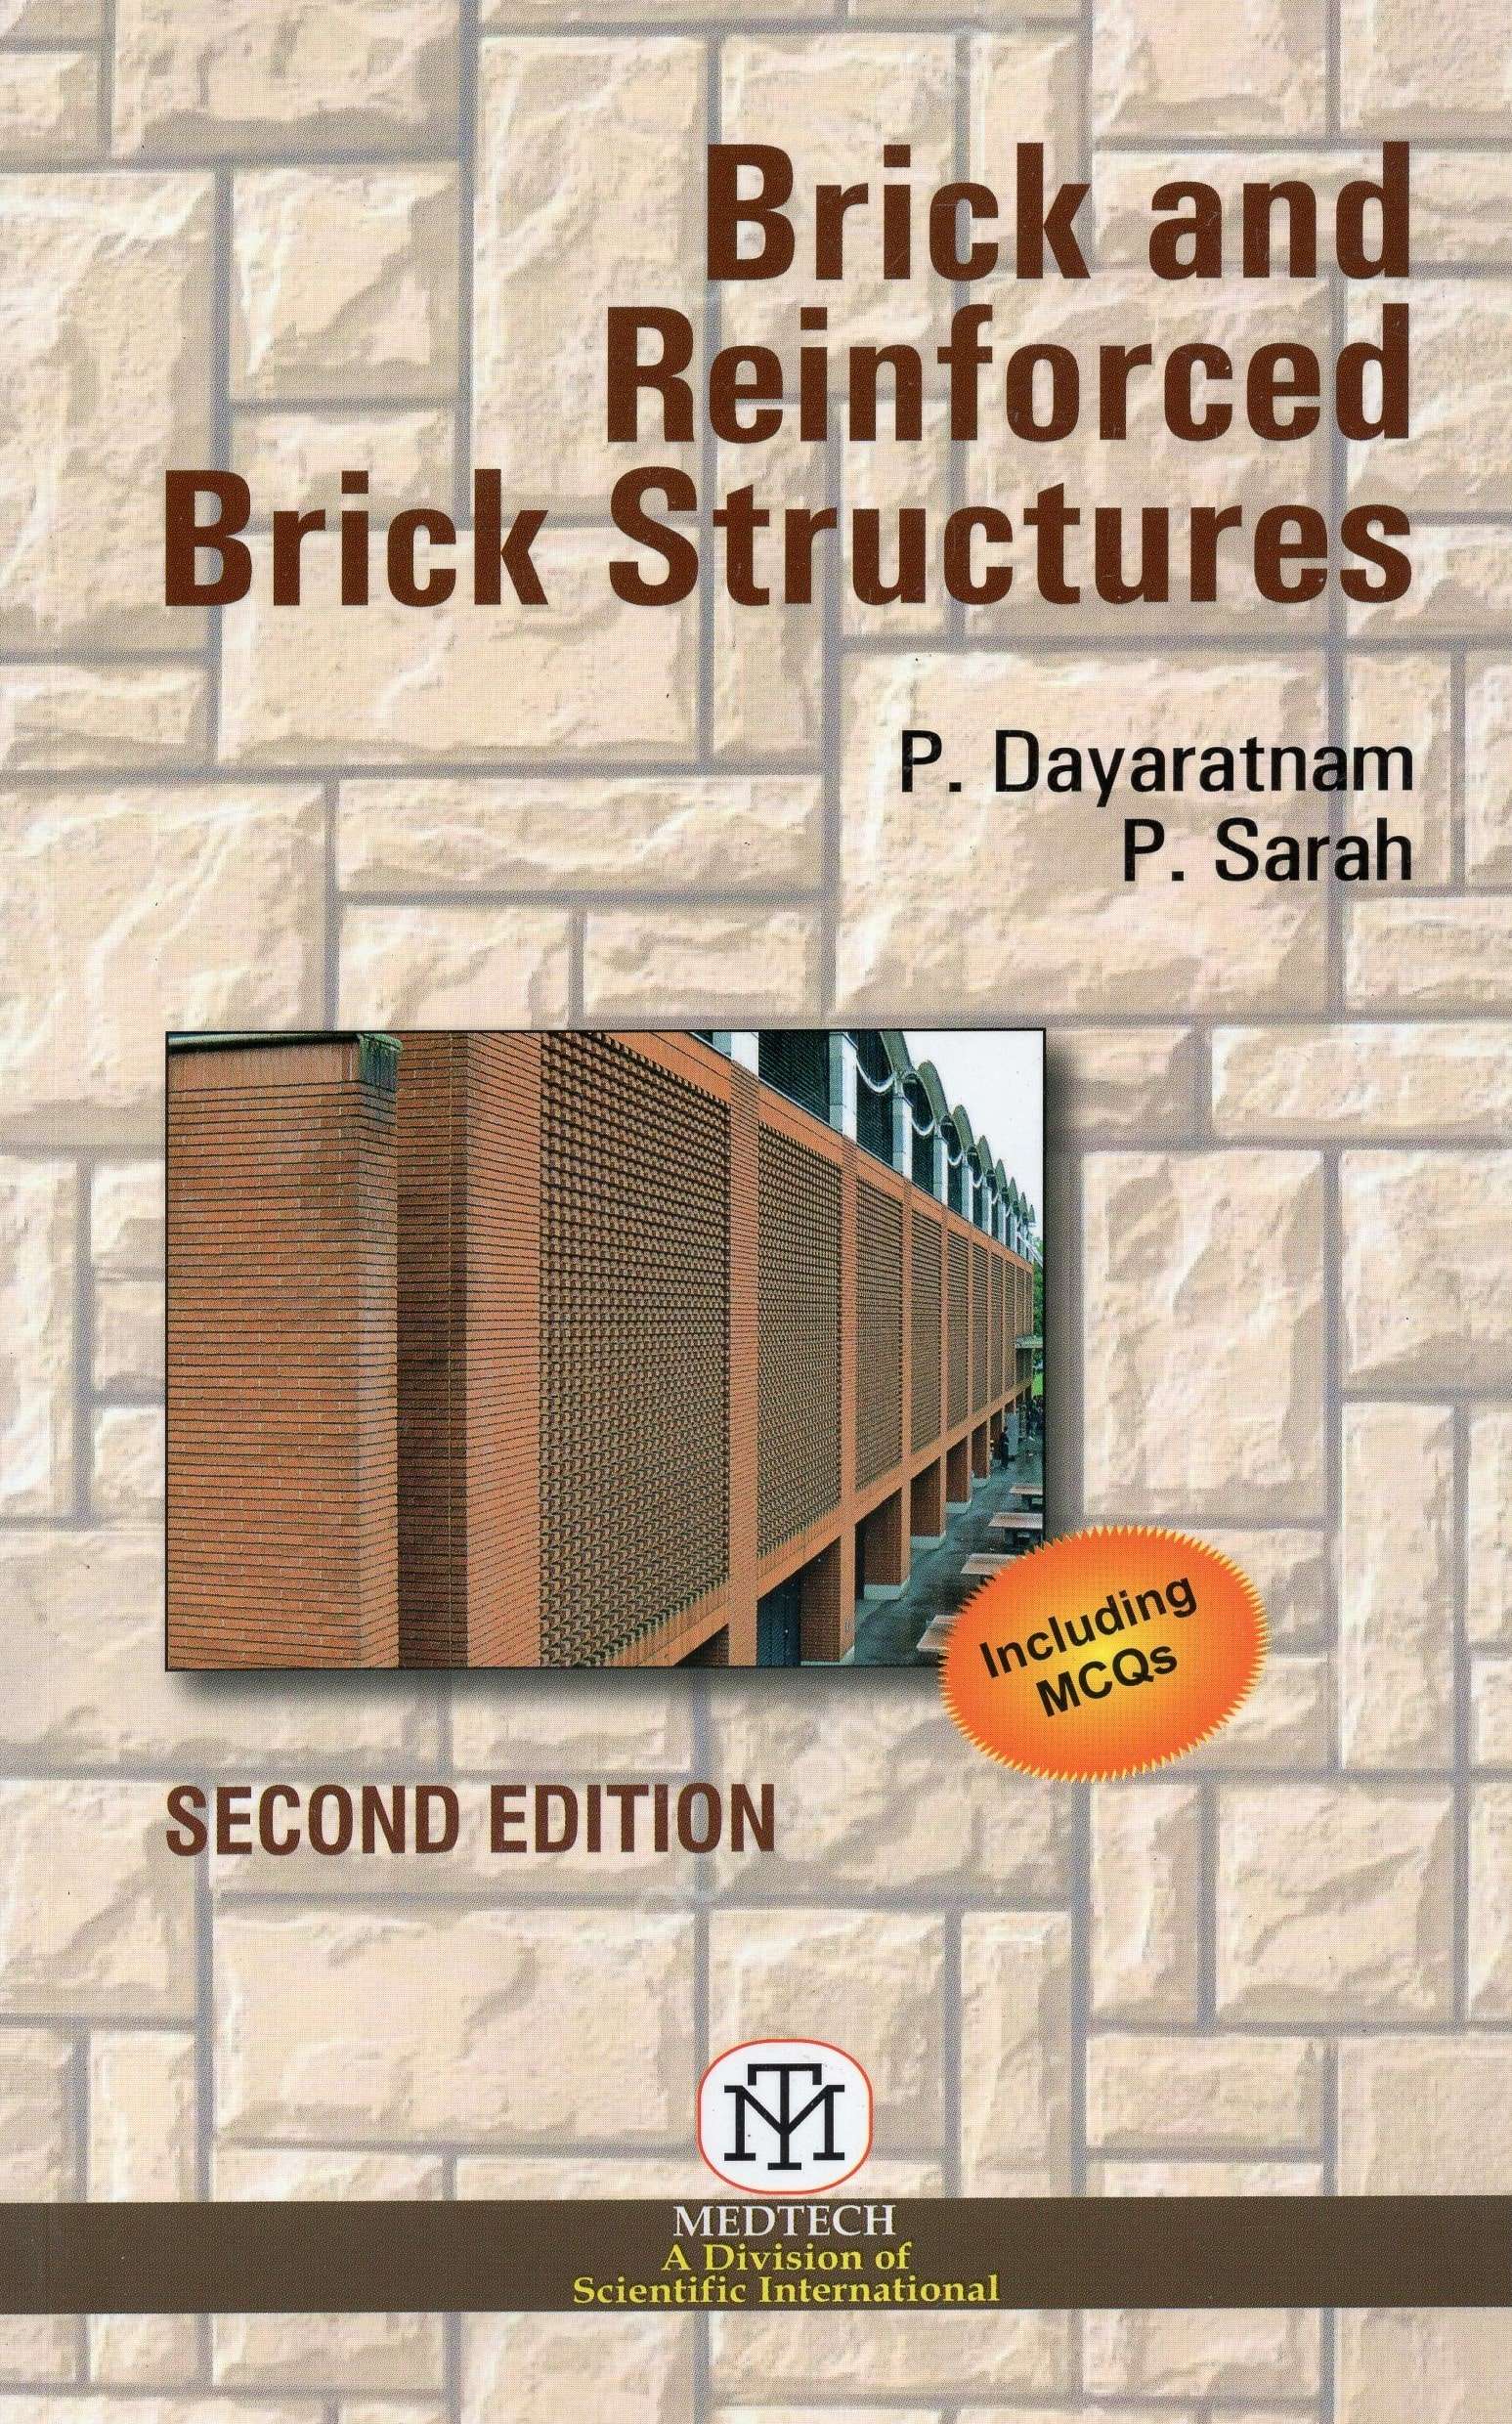 Brick and Reinforced Brick Structures